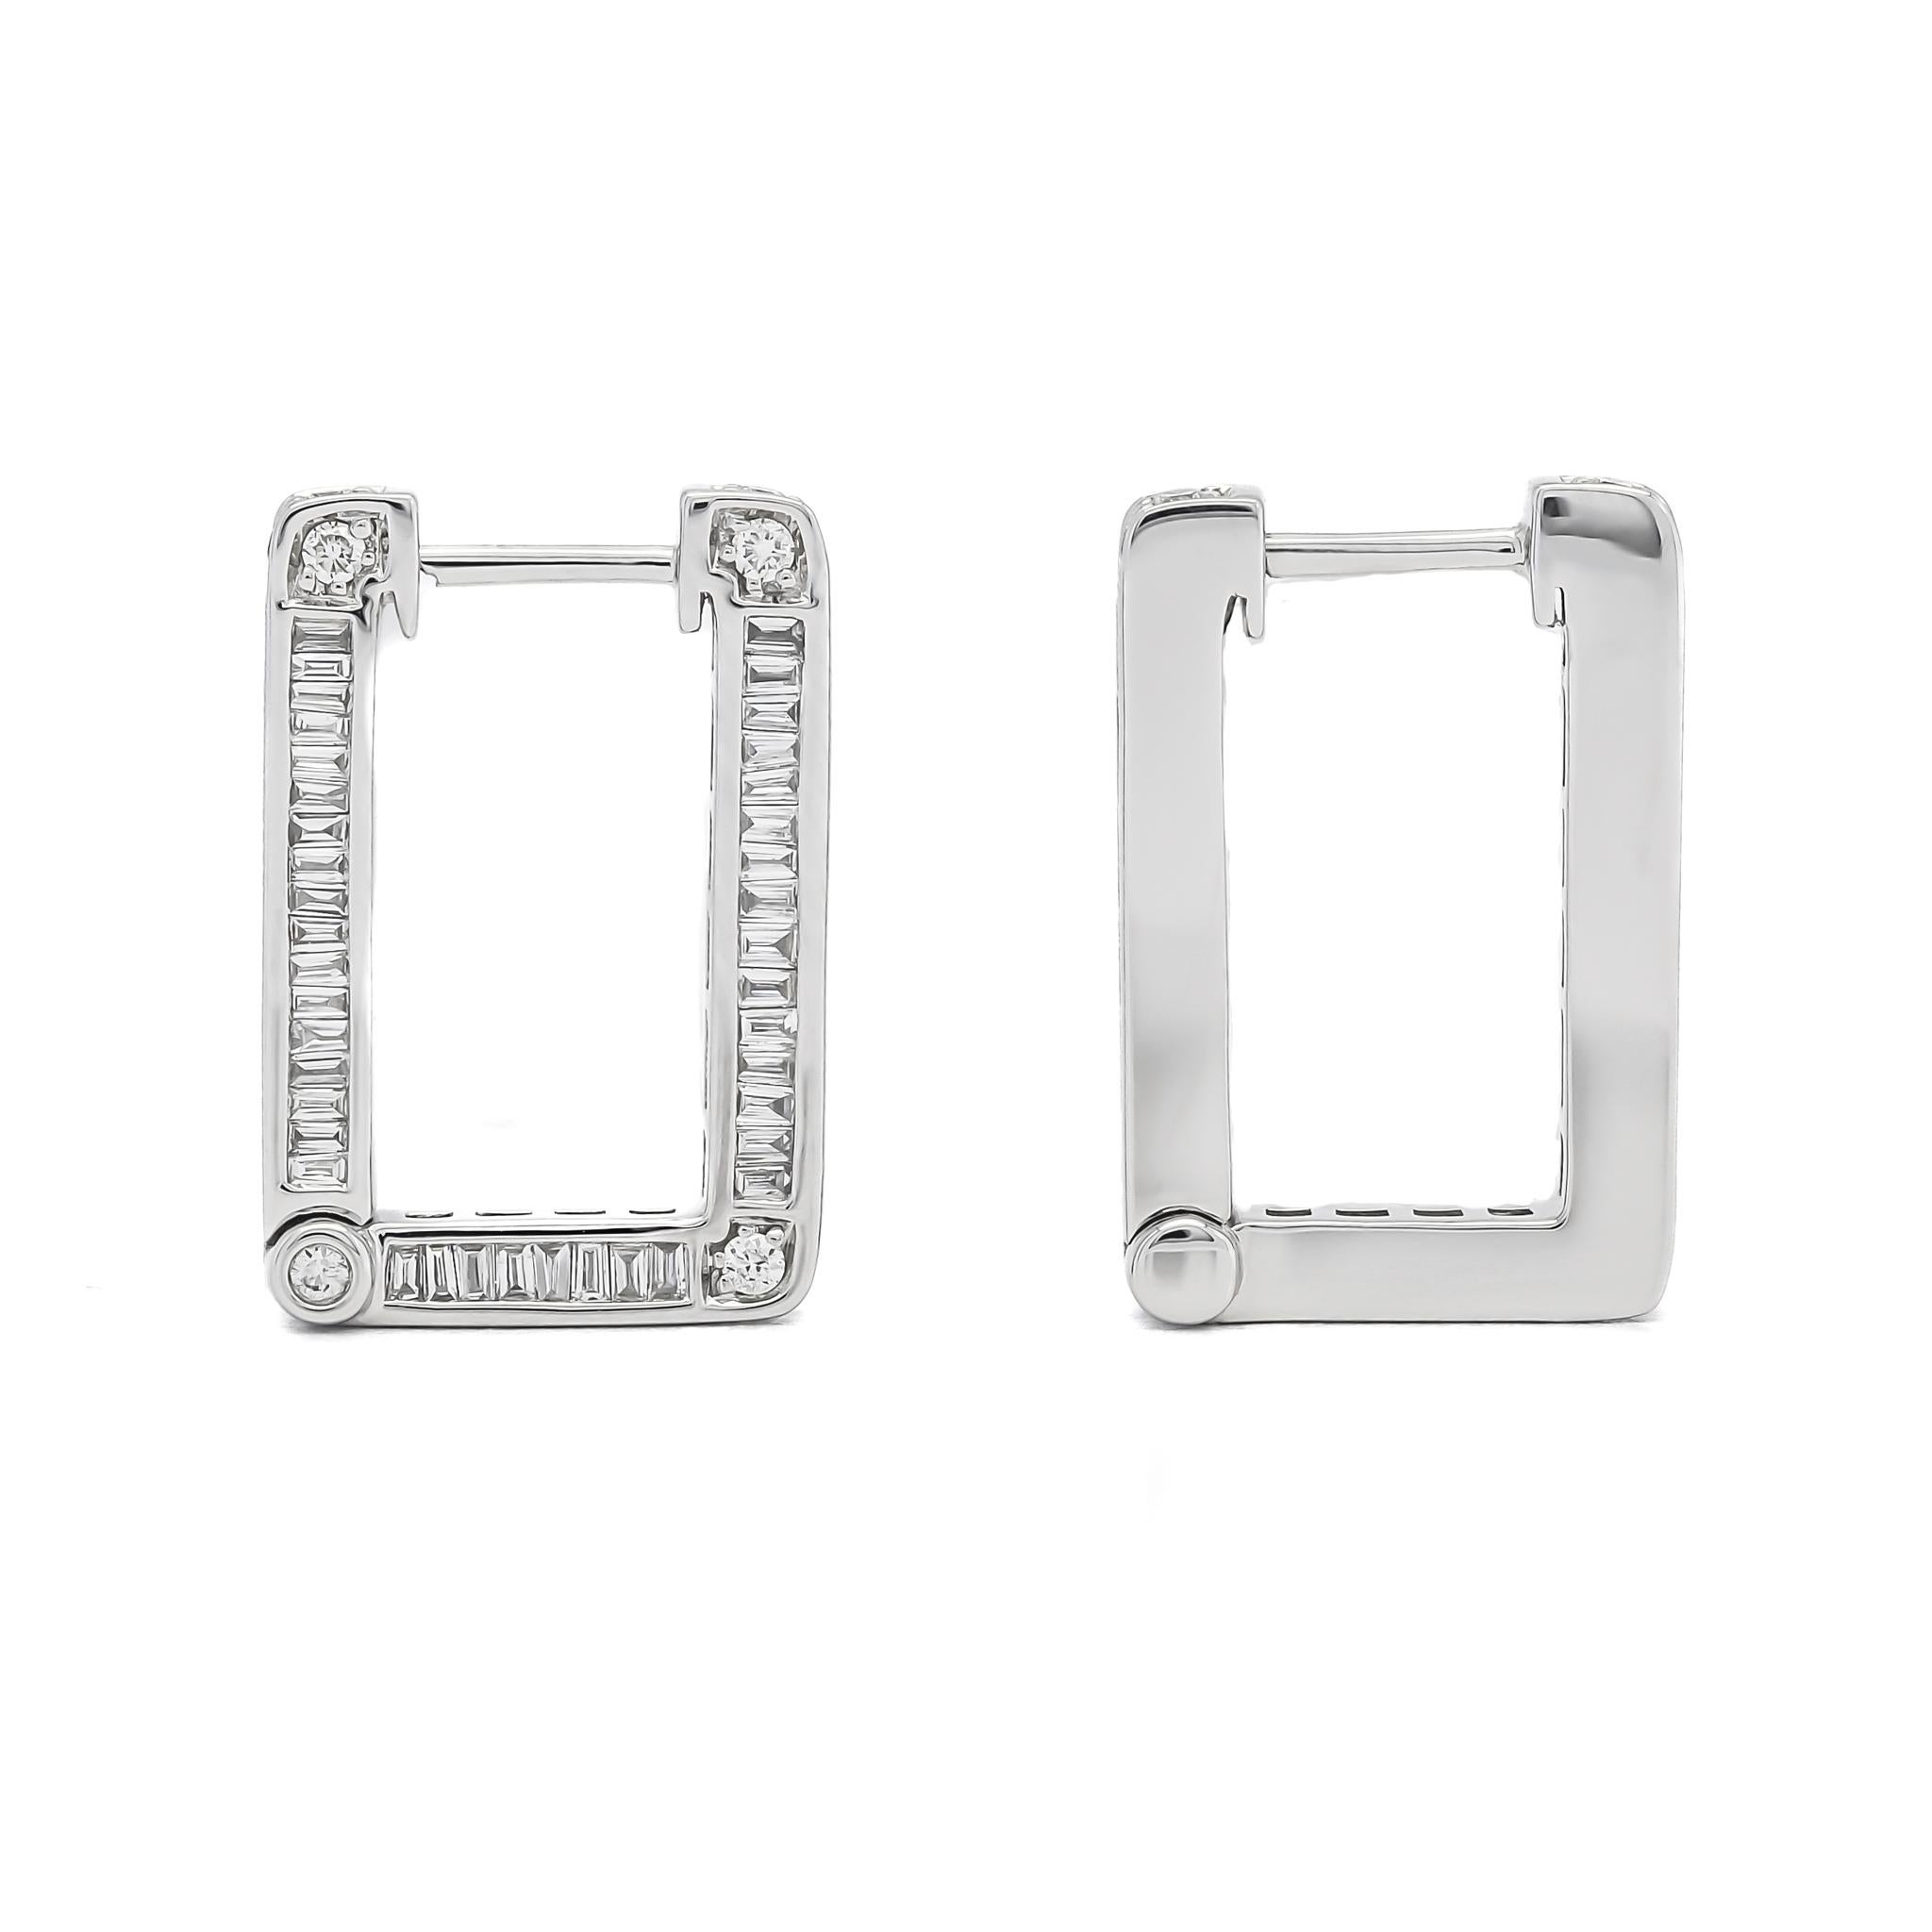 Exude elegance with our Inside Out Baguette Quad Hoop Earrings in 18K White Gold, adorned with a breathtaking 2.90 carats of exquisite baguette-cut diamonds. Meticulously crafted to perfection, the diamonds sparkle and shimmer from every angle,